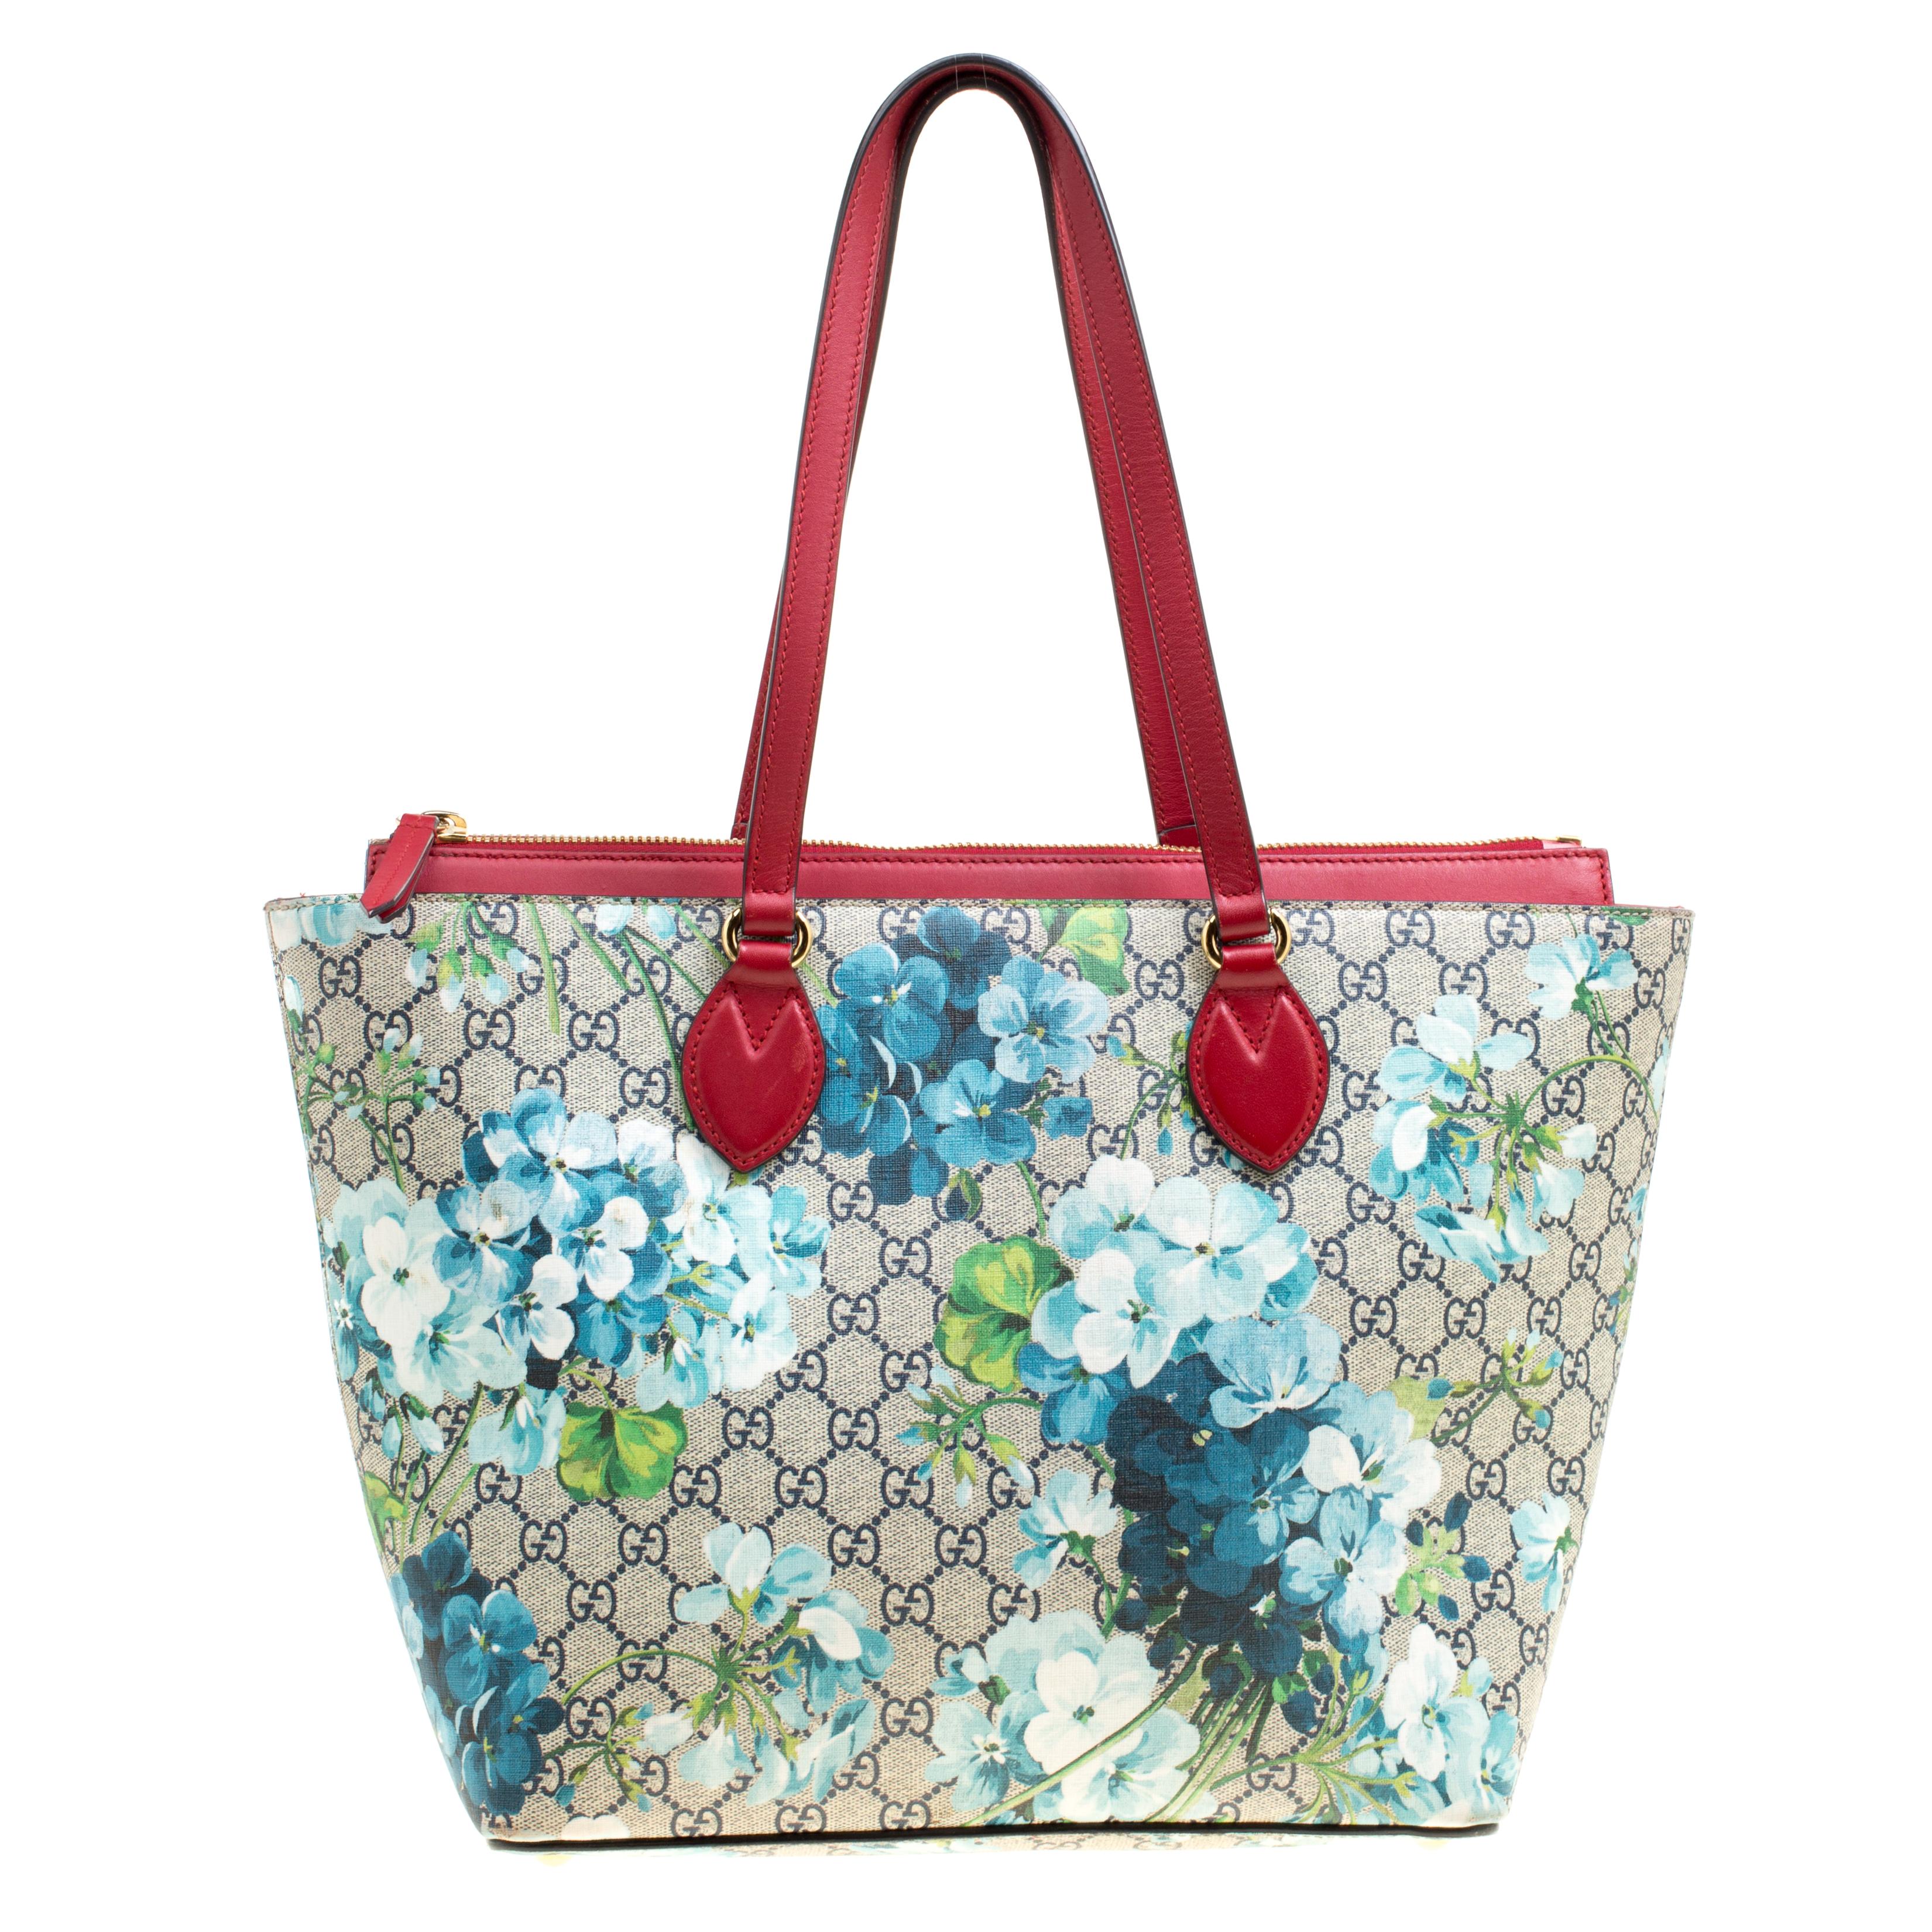 Formed using Supreme canvas and leather, this Gucci bag has prints of blooming flowers. It has two handles and a spacious suede interior. Made to an excellent finish, this tote will seamlessly blend with your grand style.

Includes: Original